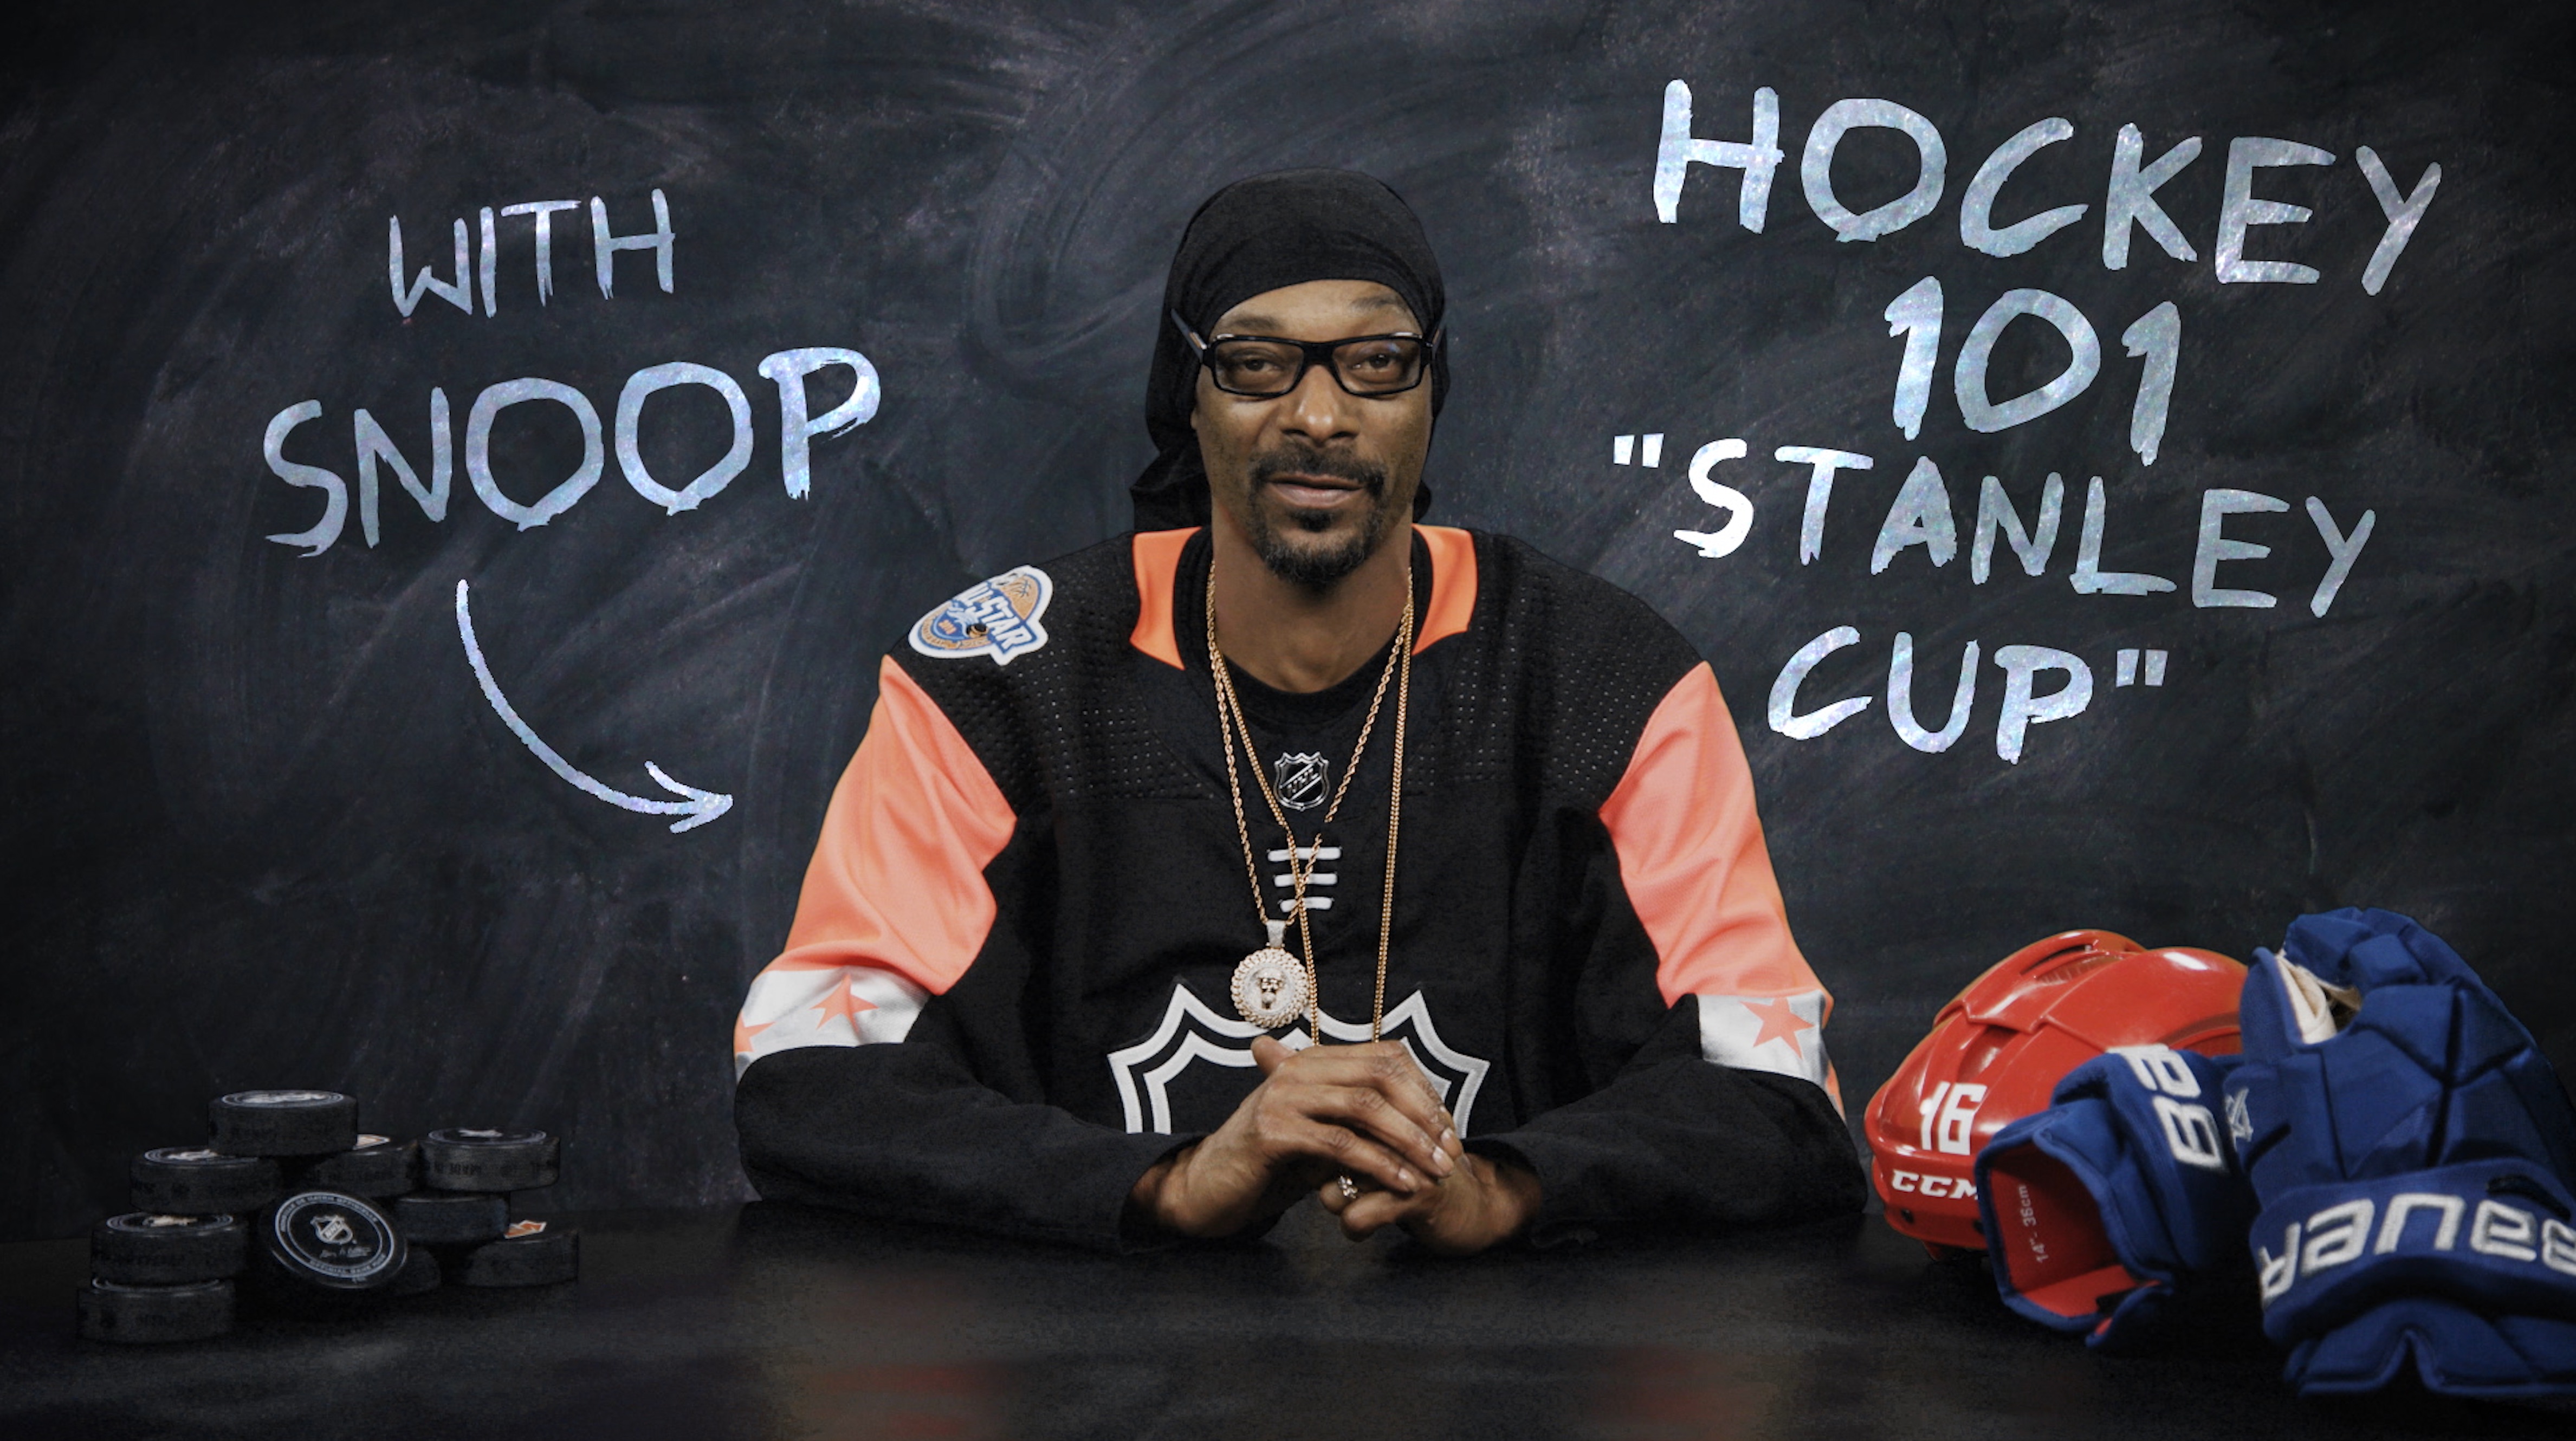 NHL Has Teamed Up with Snoop Dogg 